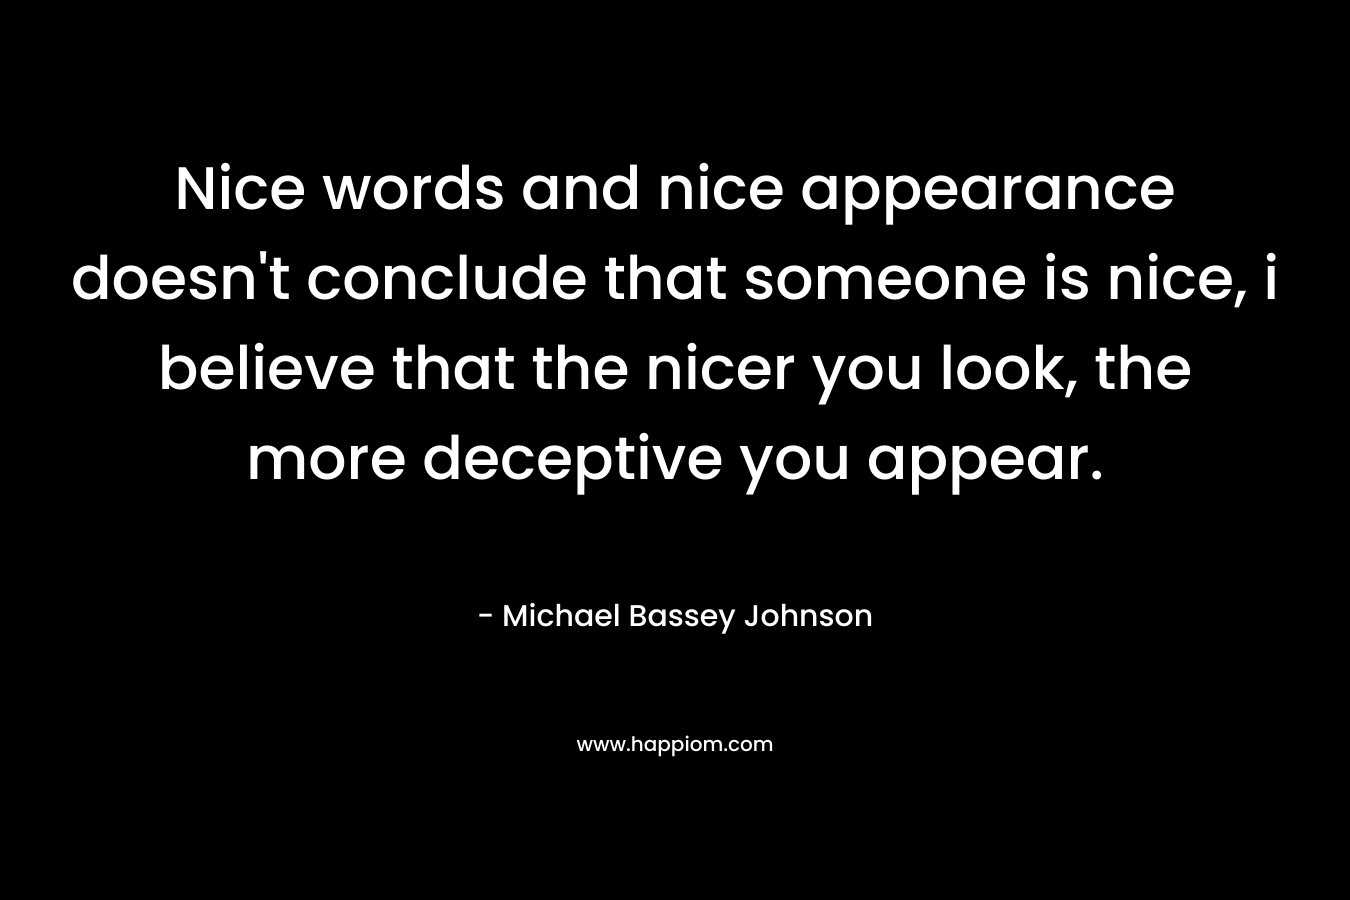 Nice words and nice appearance doesn’t conclude that someone is nice, i believe that the nicer you look, the more deceptive you appear. – Michael Bassey Johnson